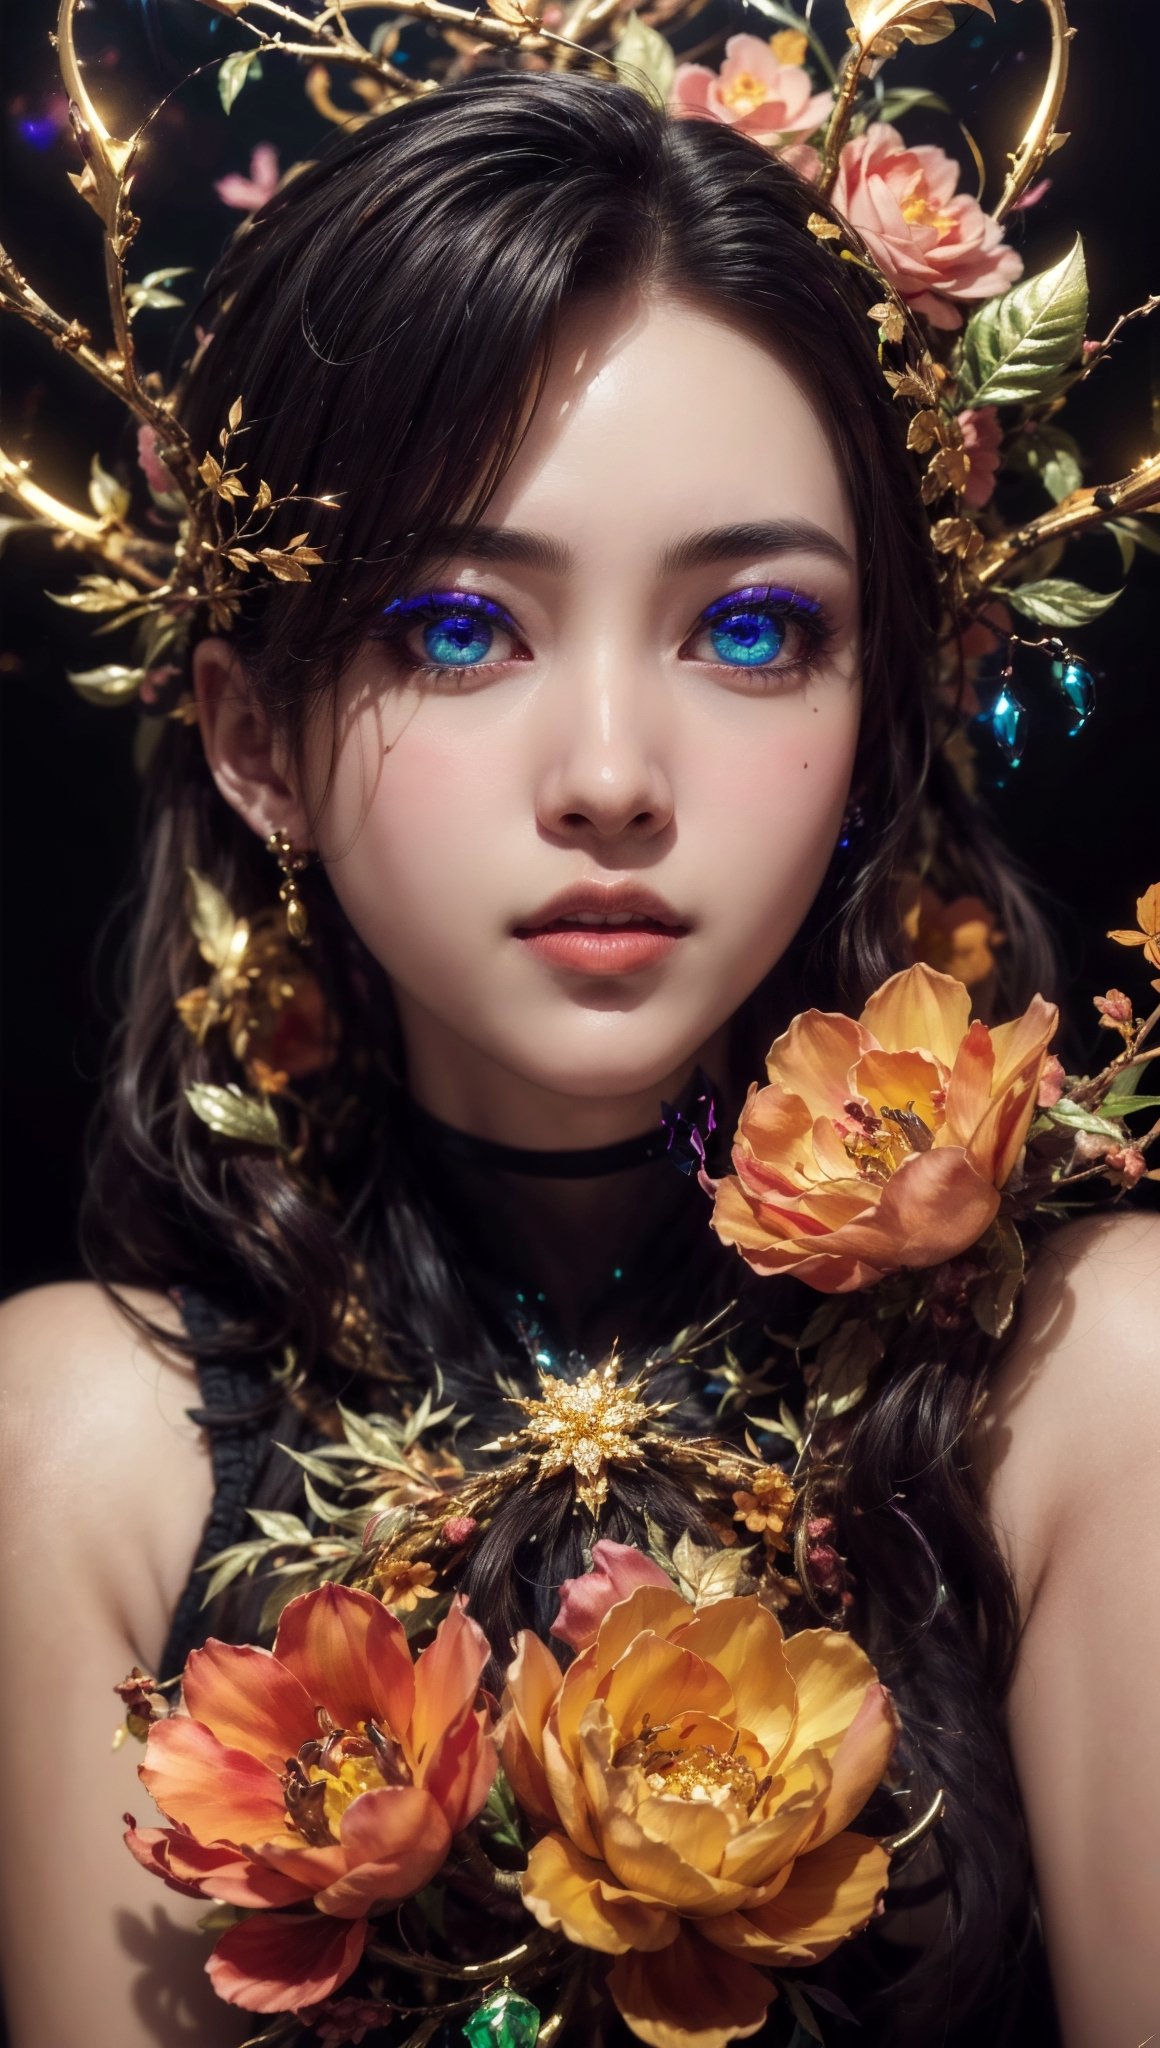 Wide-angle viewed from-above, create a artistic hyperdetailed hyper-realistic beautiful woman with colorful flowers, her body in covered in deeply pigmented gold paint with fractal glass elements, studio lighting, black background, iridescent glow elements, Dolby vision, professional cinematic results, professional portrait photography, 8kUHD, work of beauty and complexity, hyperdetailed face, hyperdetailed eyes, The eyes are golden hazel . (The eyes contain multi different colors), shap focus on eyes ,dripping paint,ColorART,monster,noctuyen